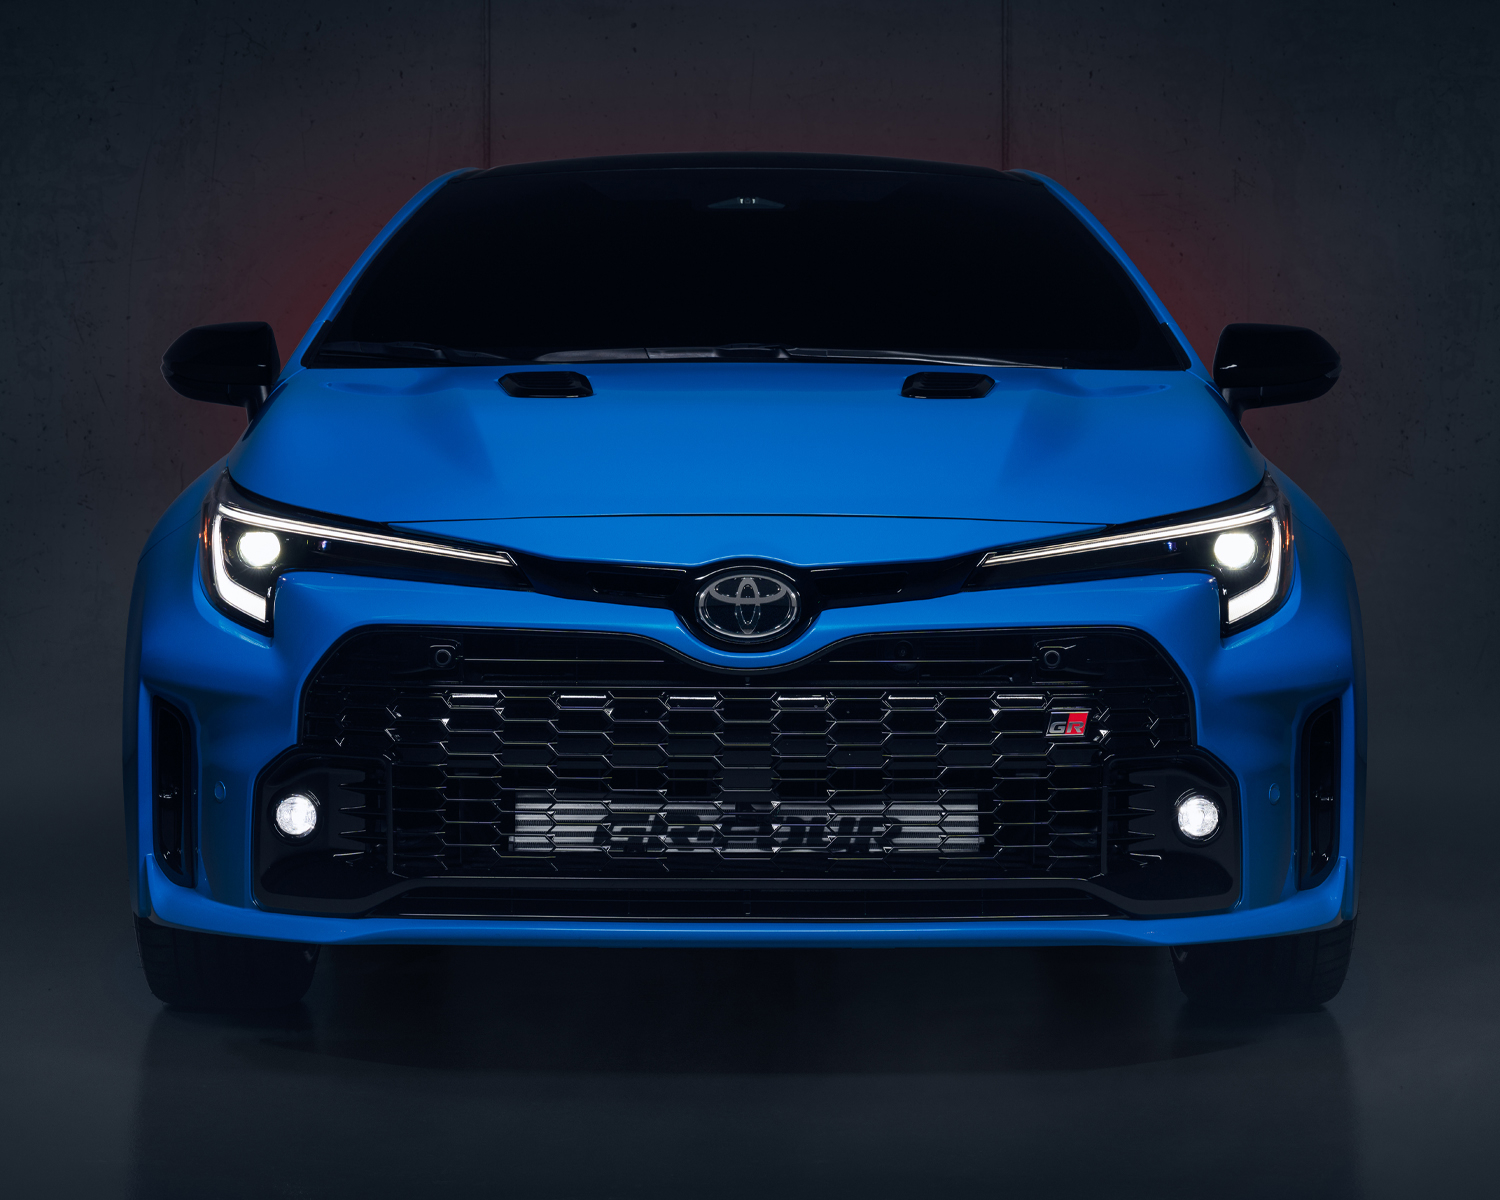 GR Corolla Circuit Edition shown in Blue Flame